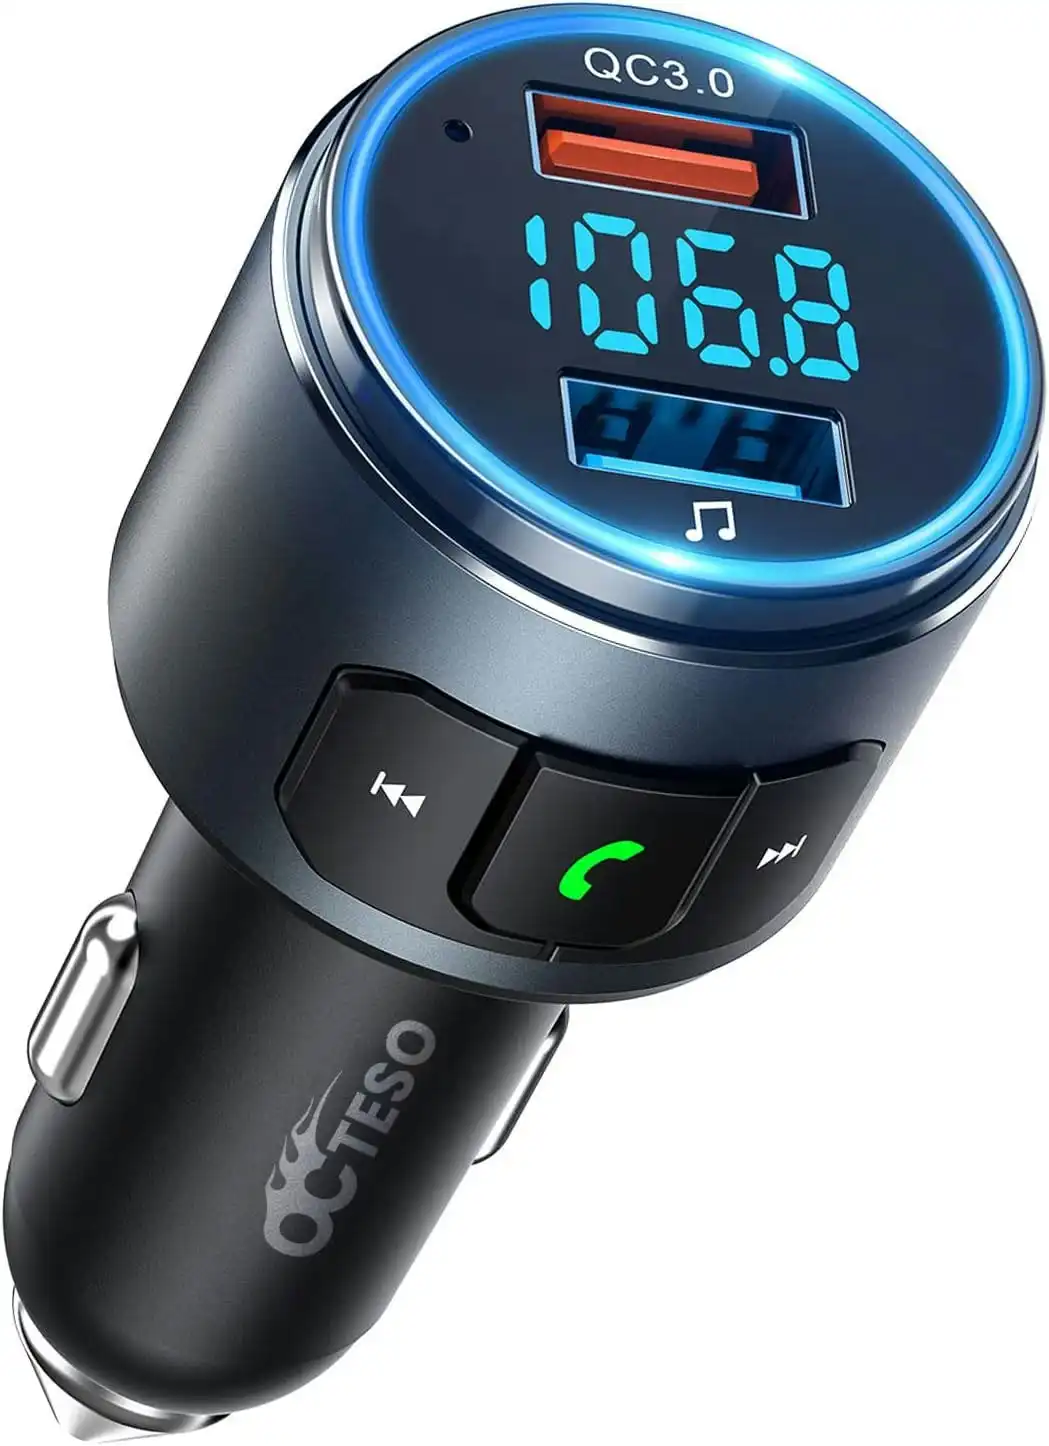 VicTsing (Upgraded Version) V5.0 Bluetooth FM Transmitter for Car, QC3.0 & LED Backlit Wireless Bluetooth FM Radio Adapter Music Player /Car Kit with